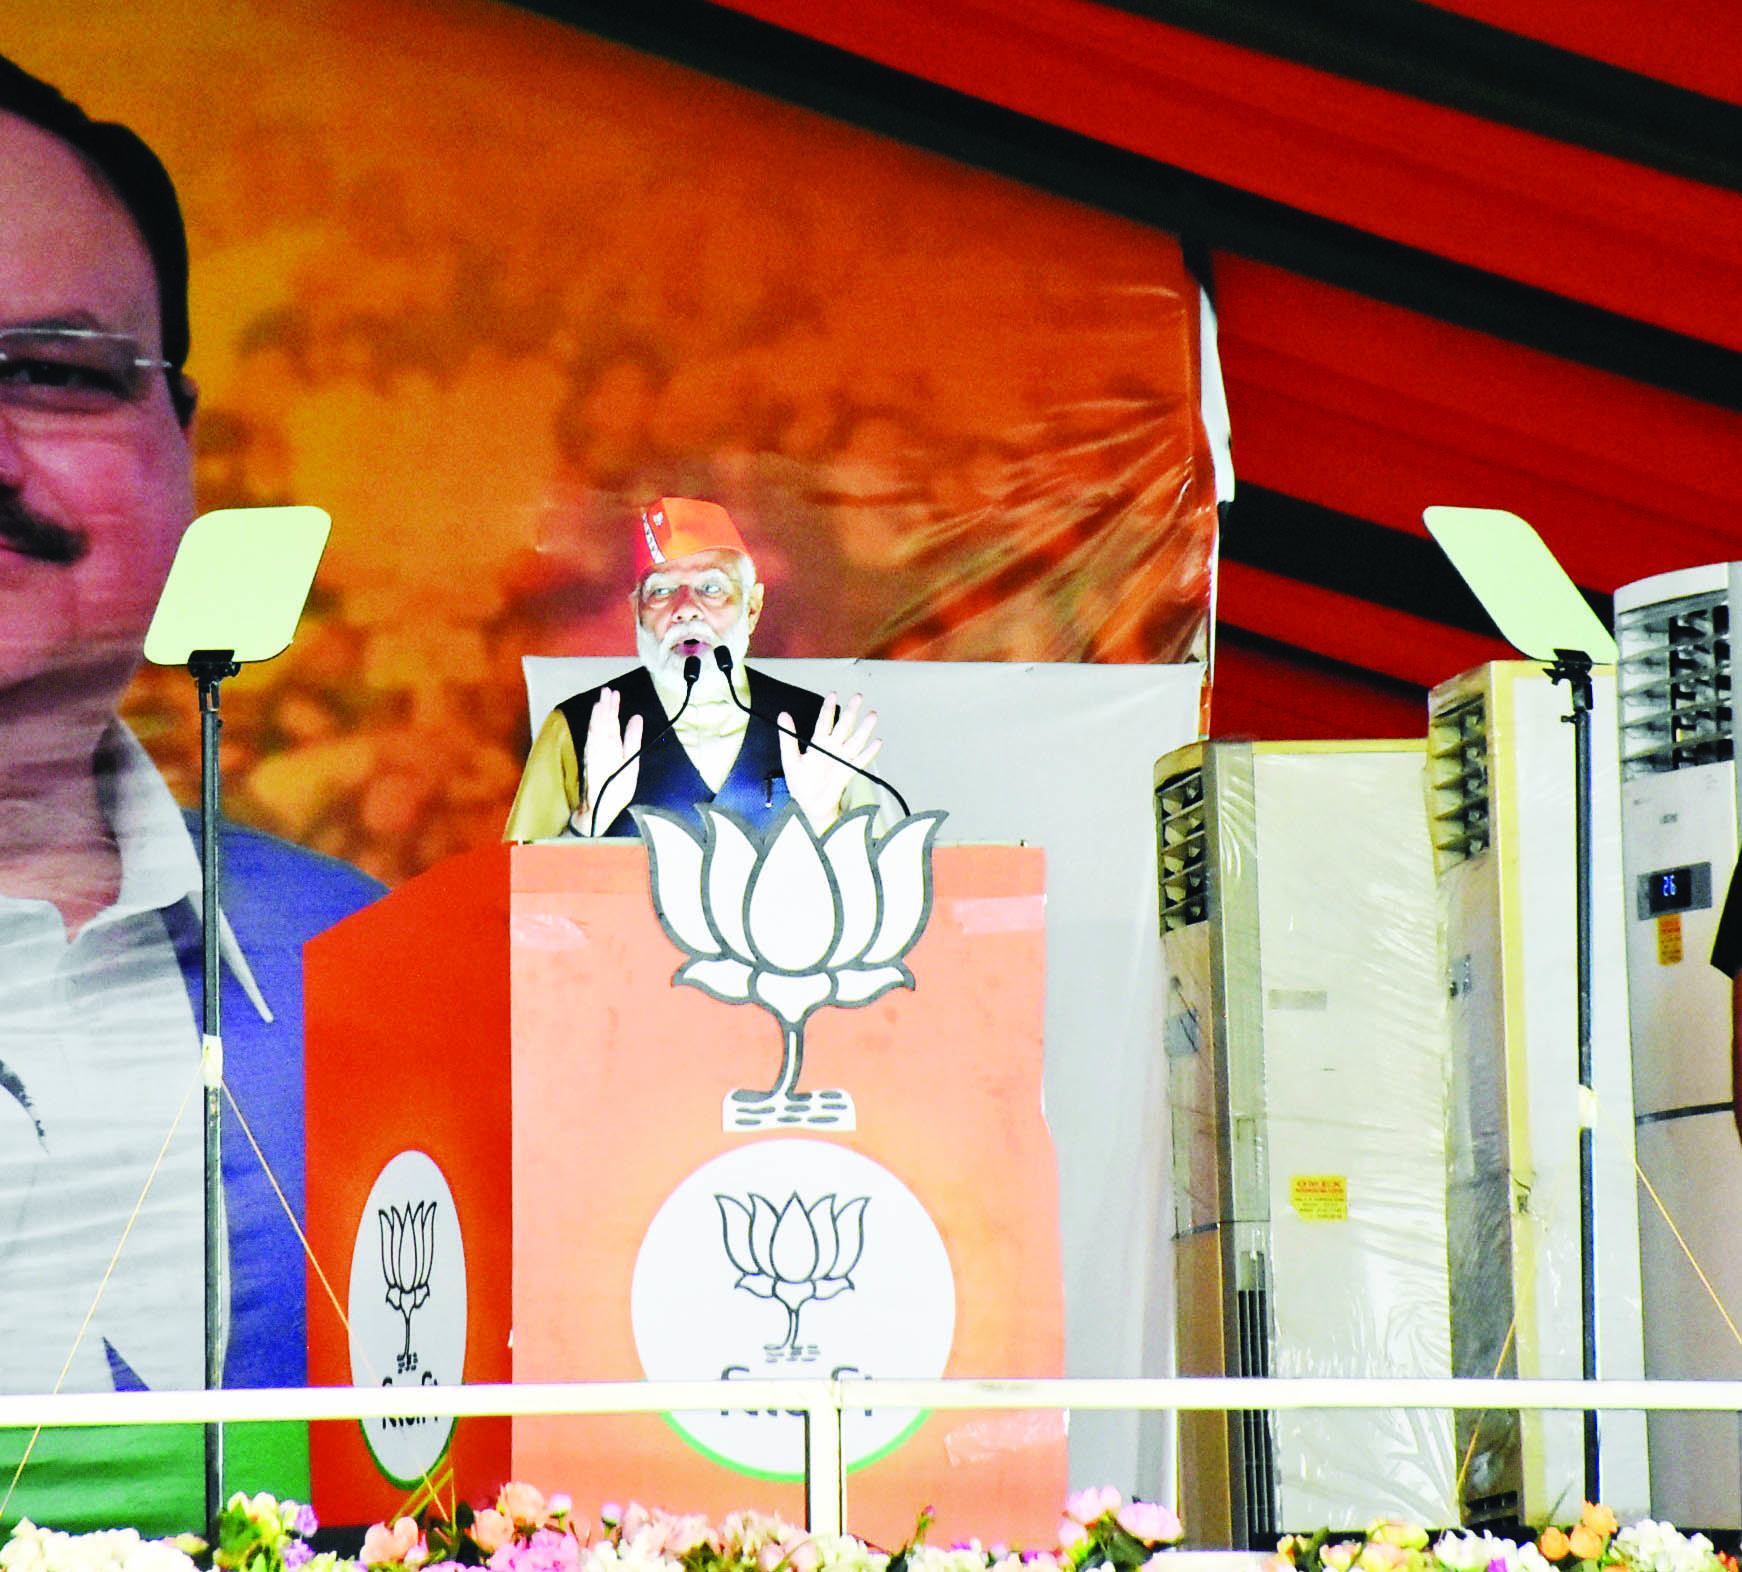 PM fails to make any concrete announcements on Gorkha issue from Siliguri